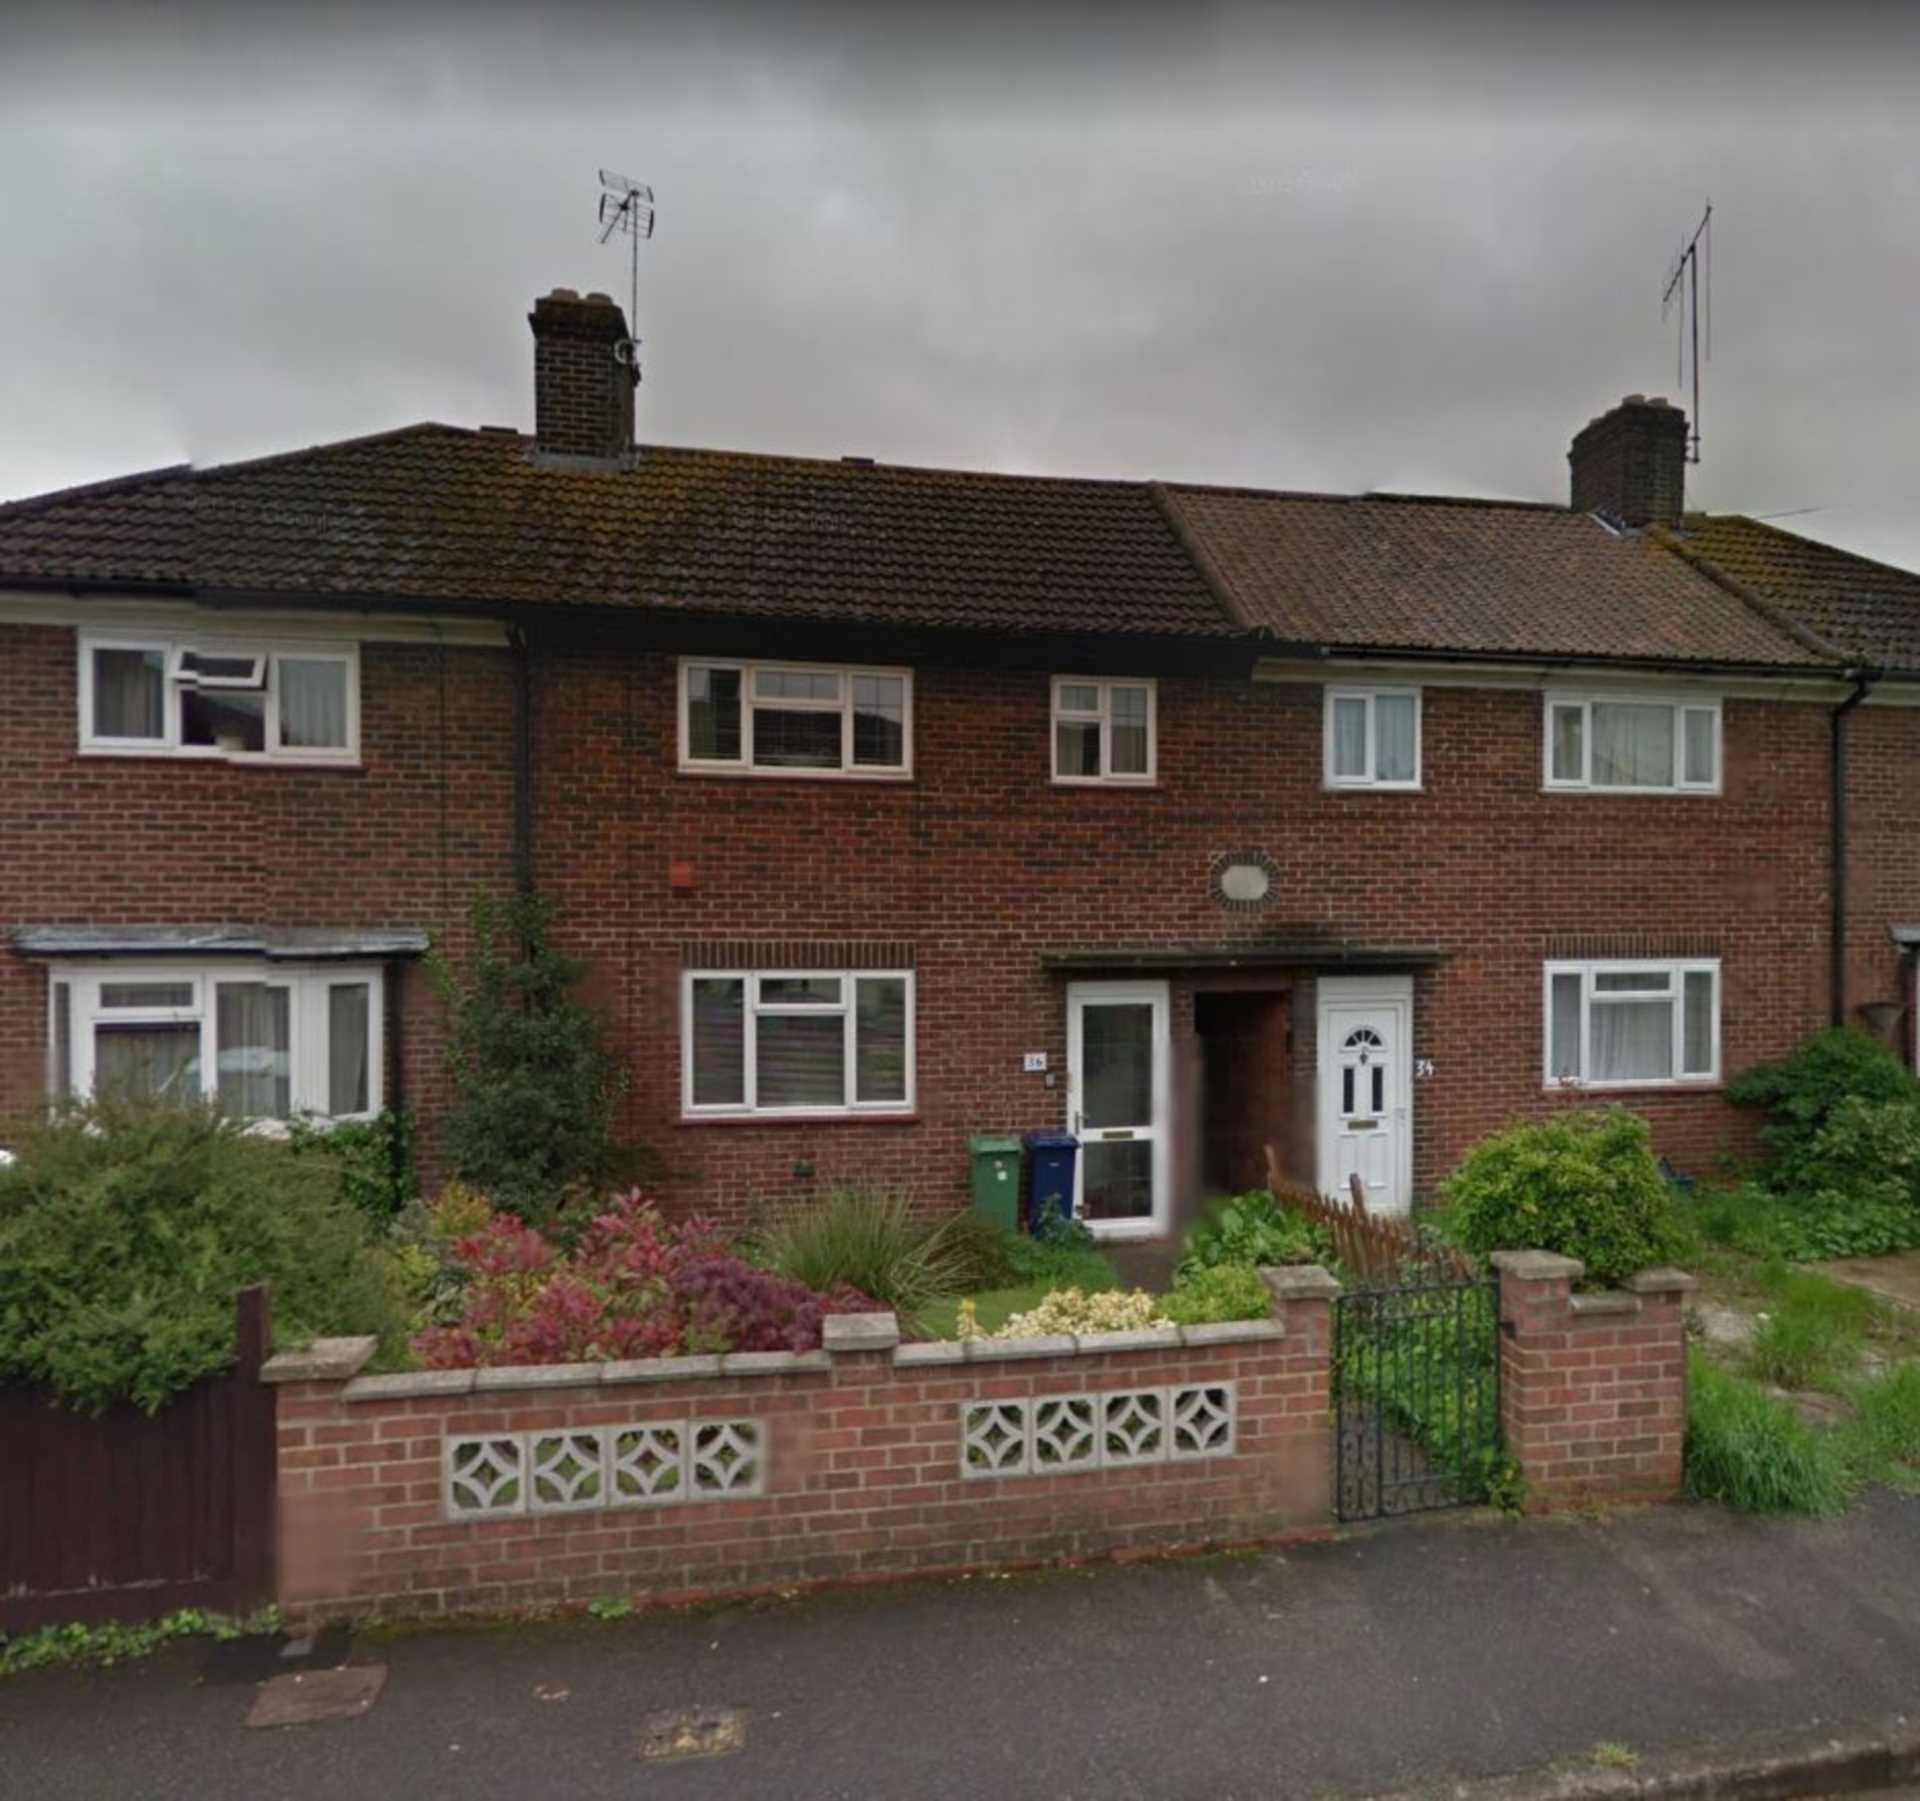 3 bed House (unspecified) for rent in Oxford. From James C Penny Estate Agents - Central North Oxford